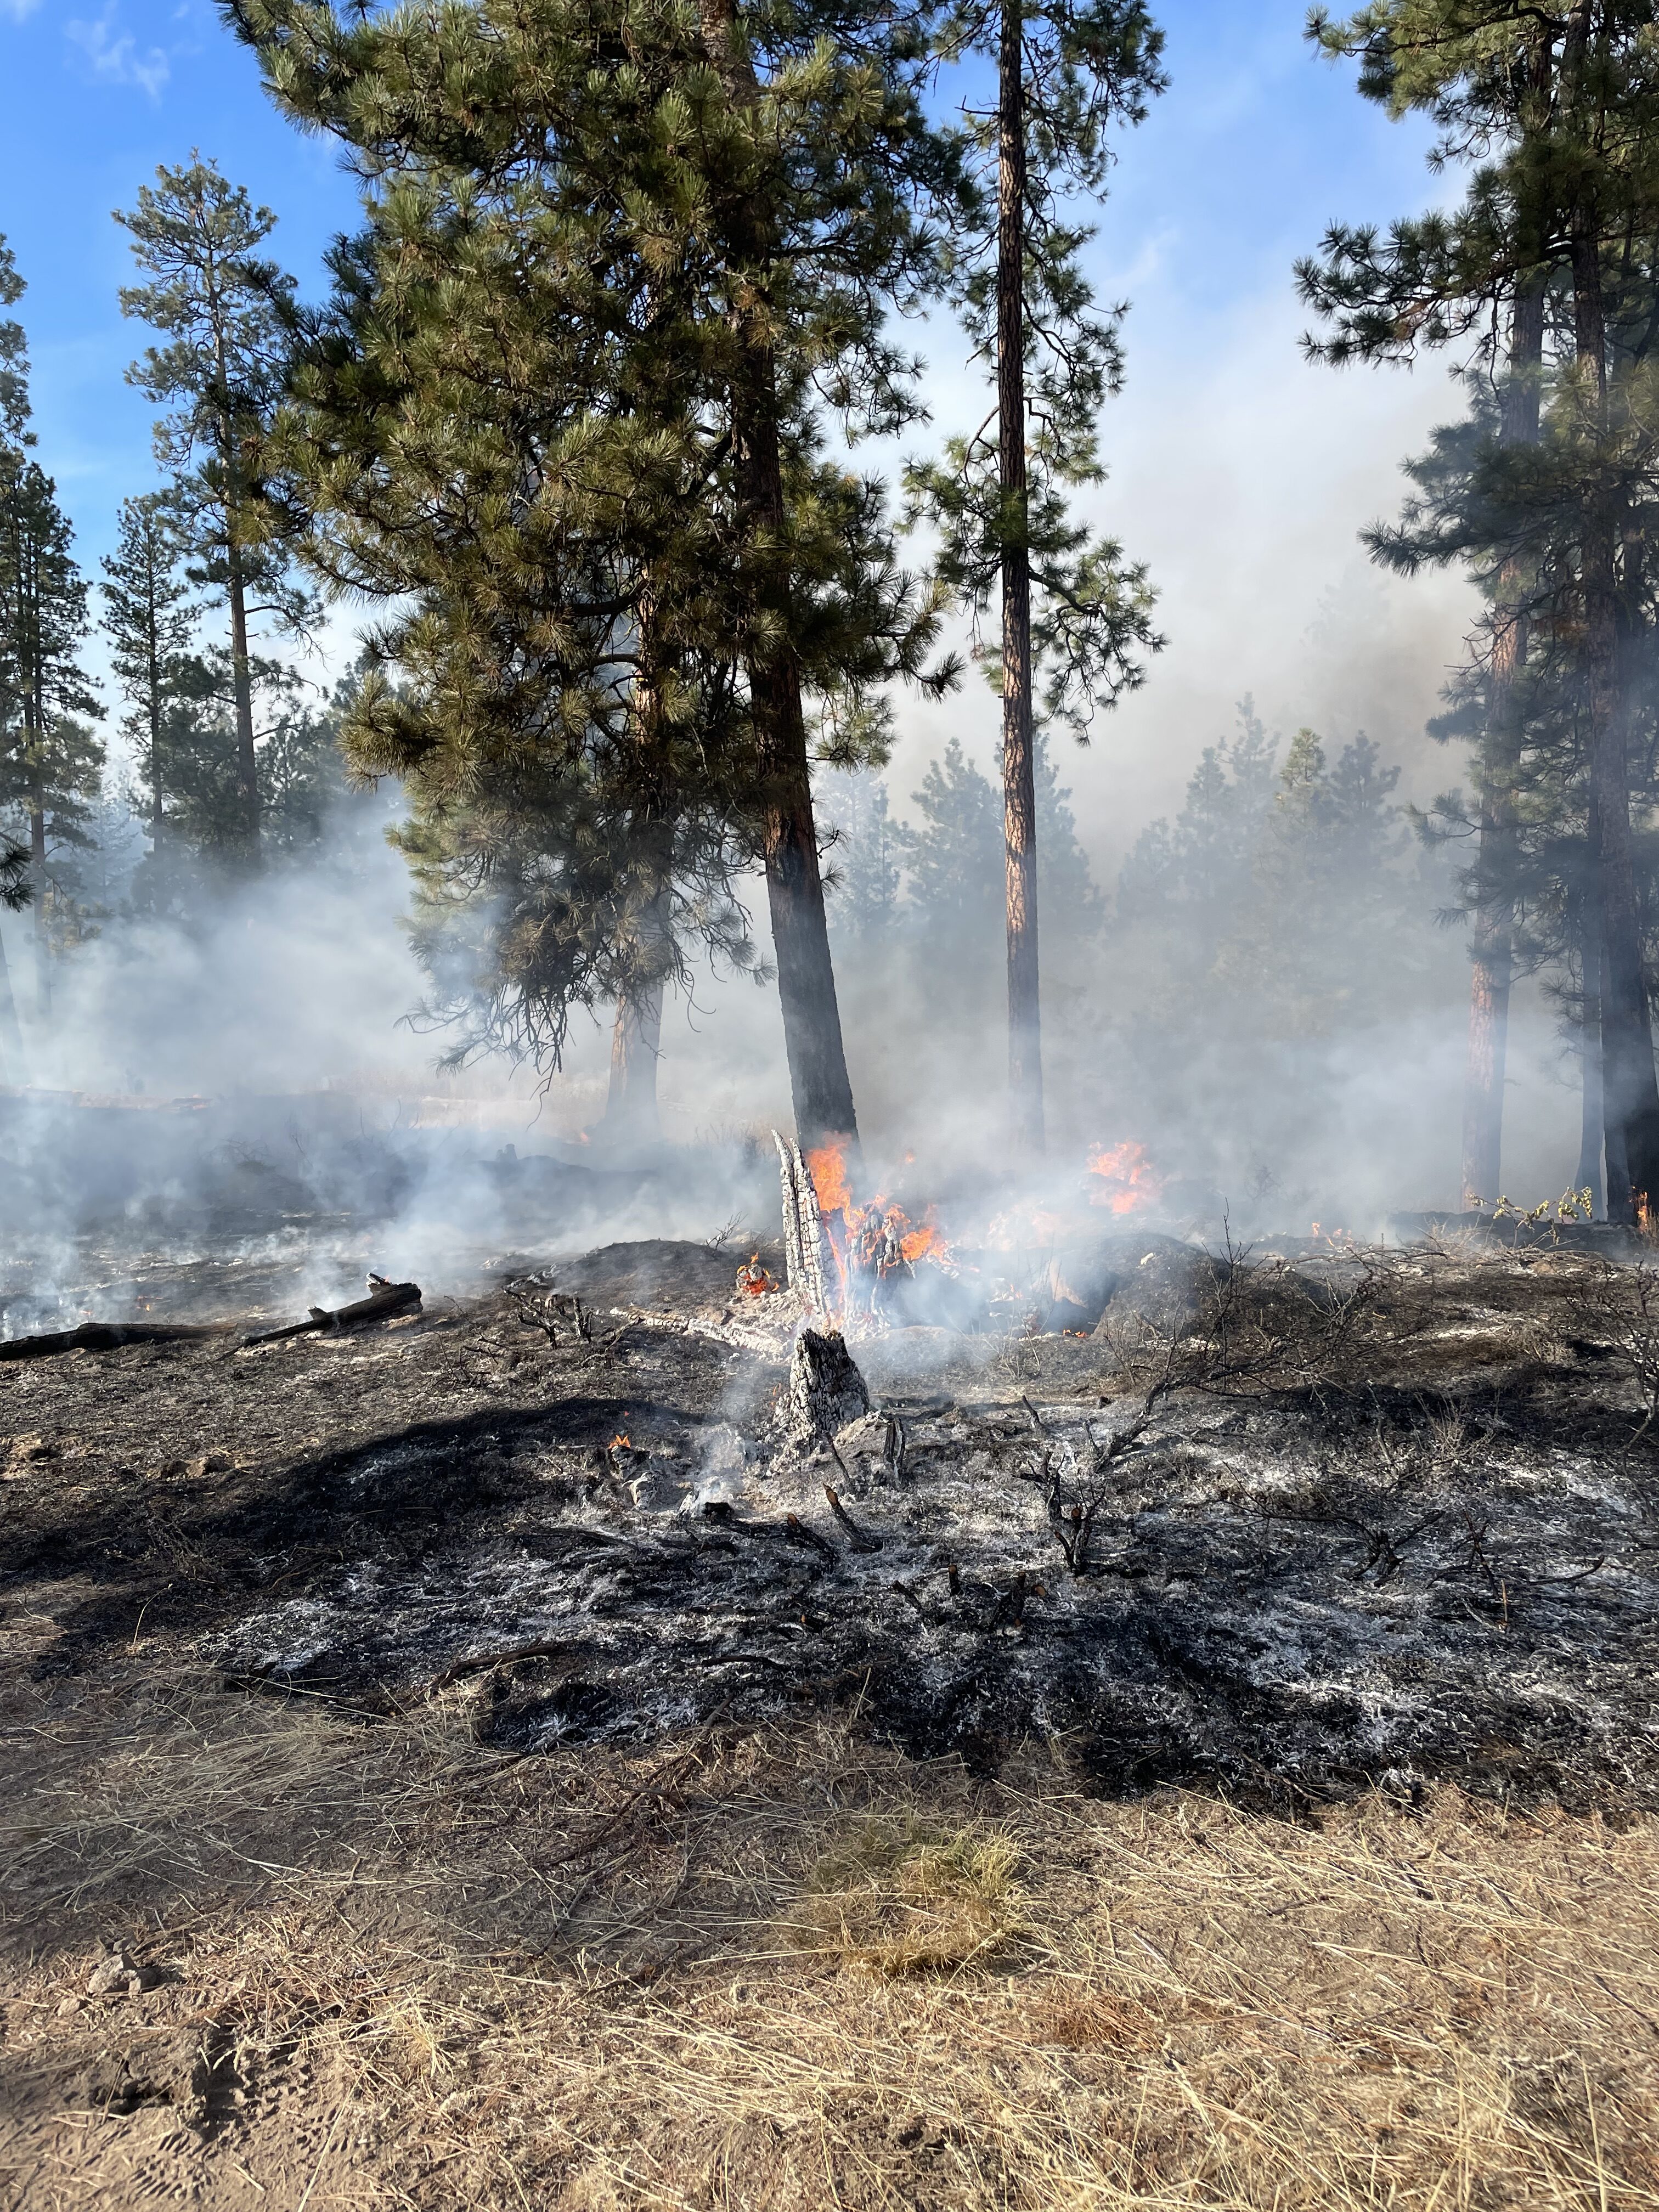 Fire can bring benefits to the ecosystem — soil on burned landscapes contains up to three times more nutrients than land untouched by fire. Photo courtesy of DNR Communications.